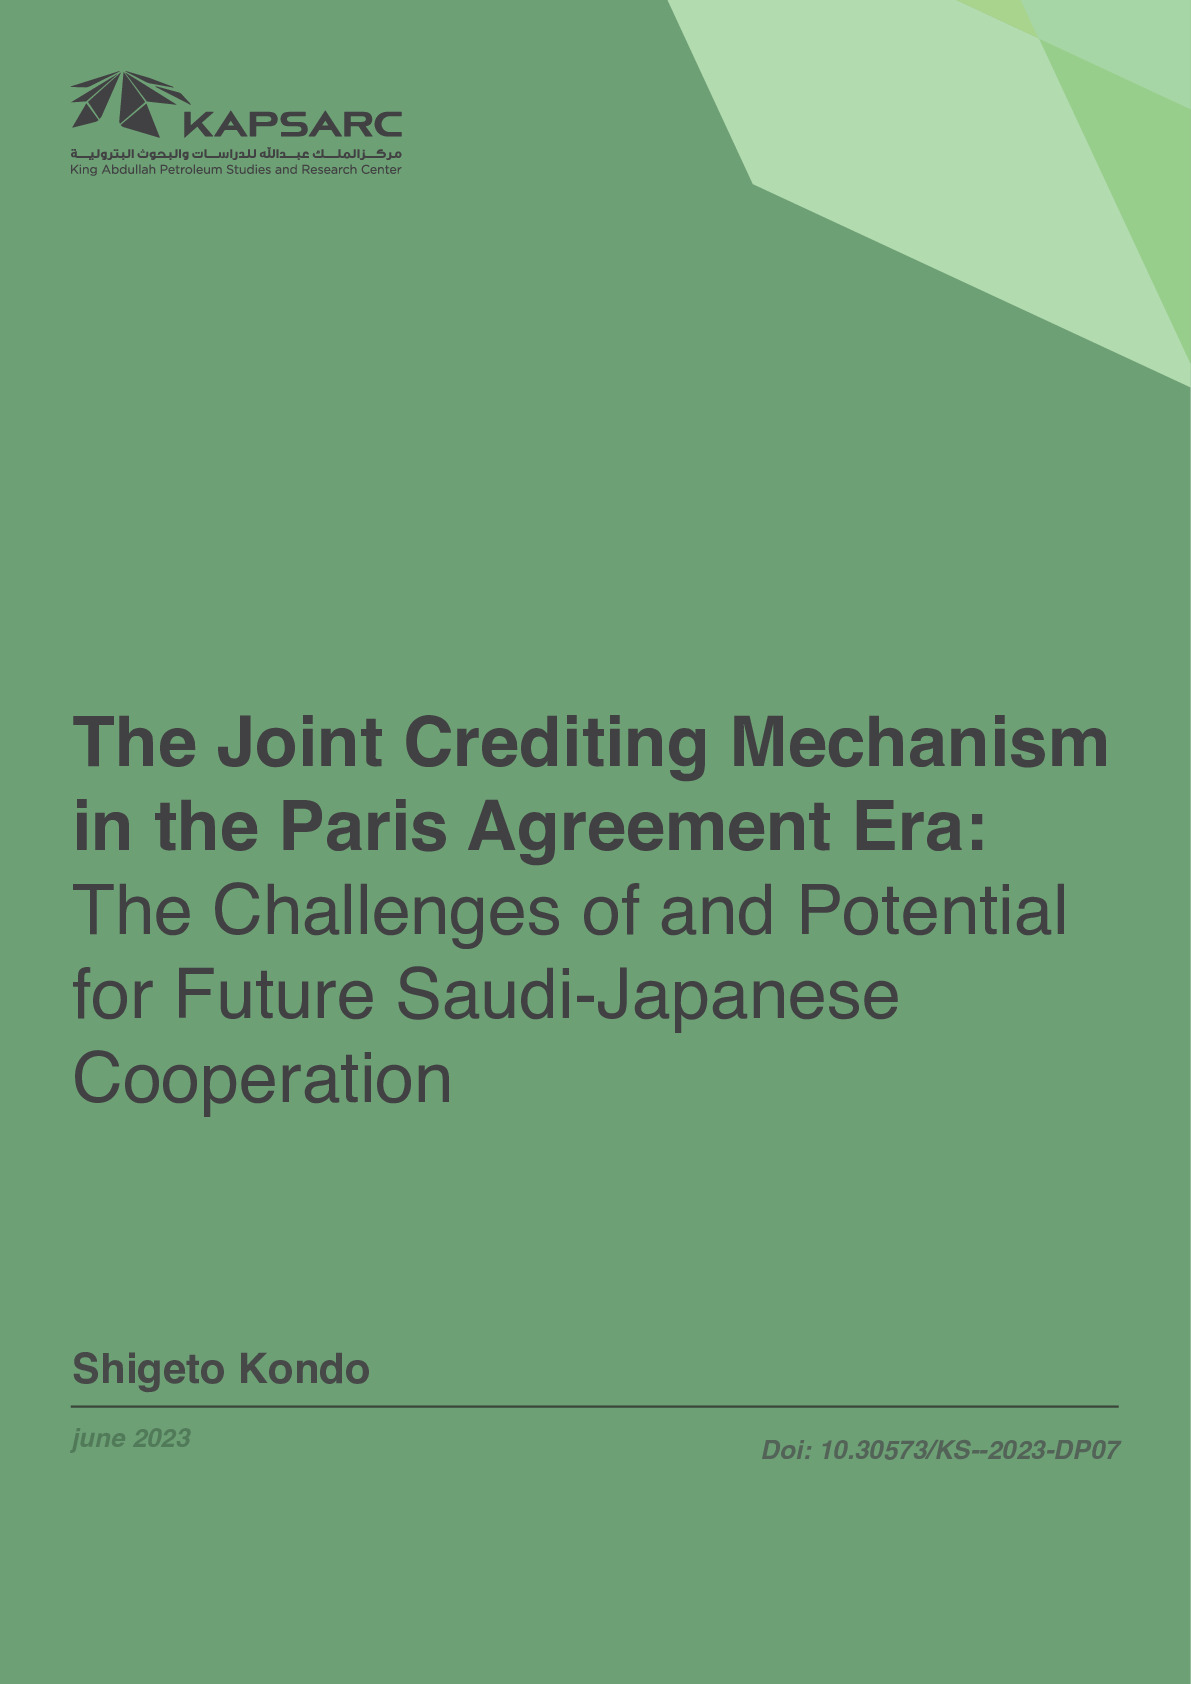 The Joint Crediting Mechanism in the Paris Agreement Era: The Challenges of and Potential for Future Saudi-Japanese Cooperation